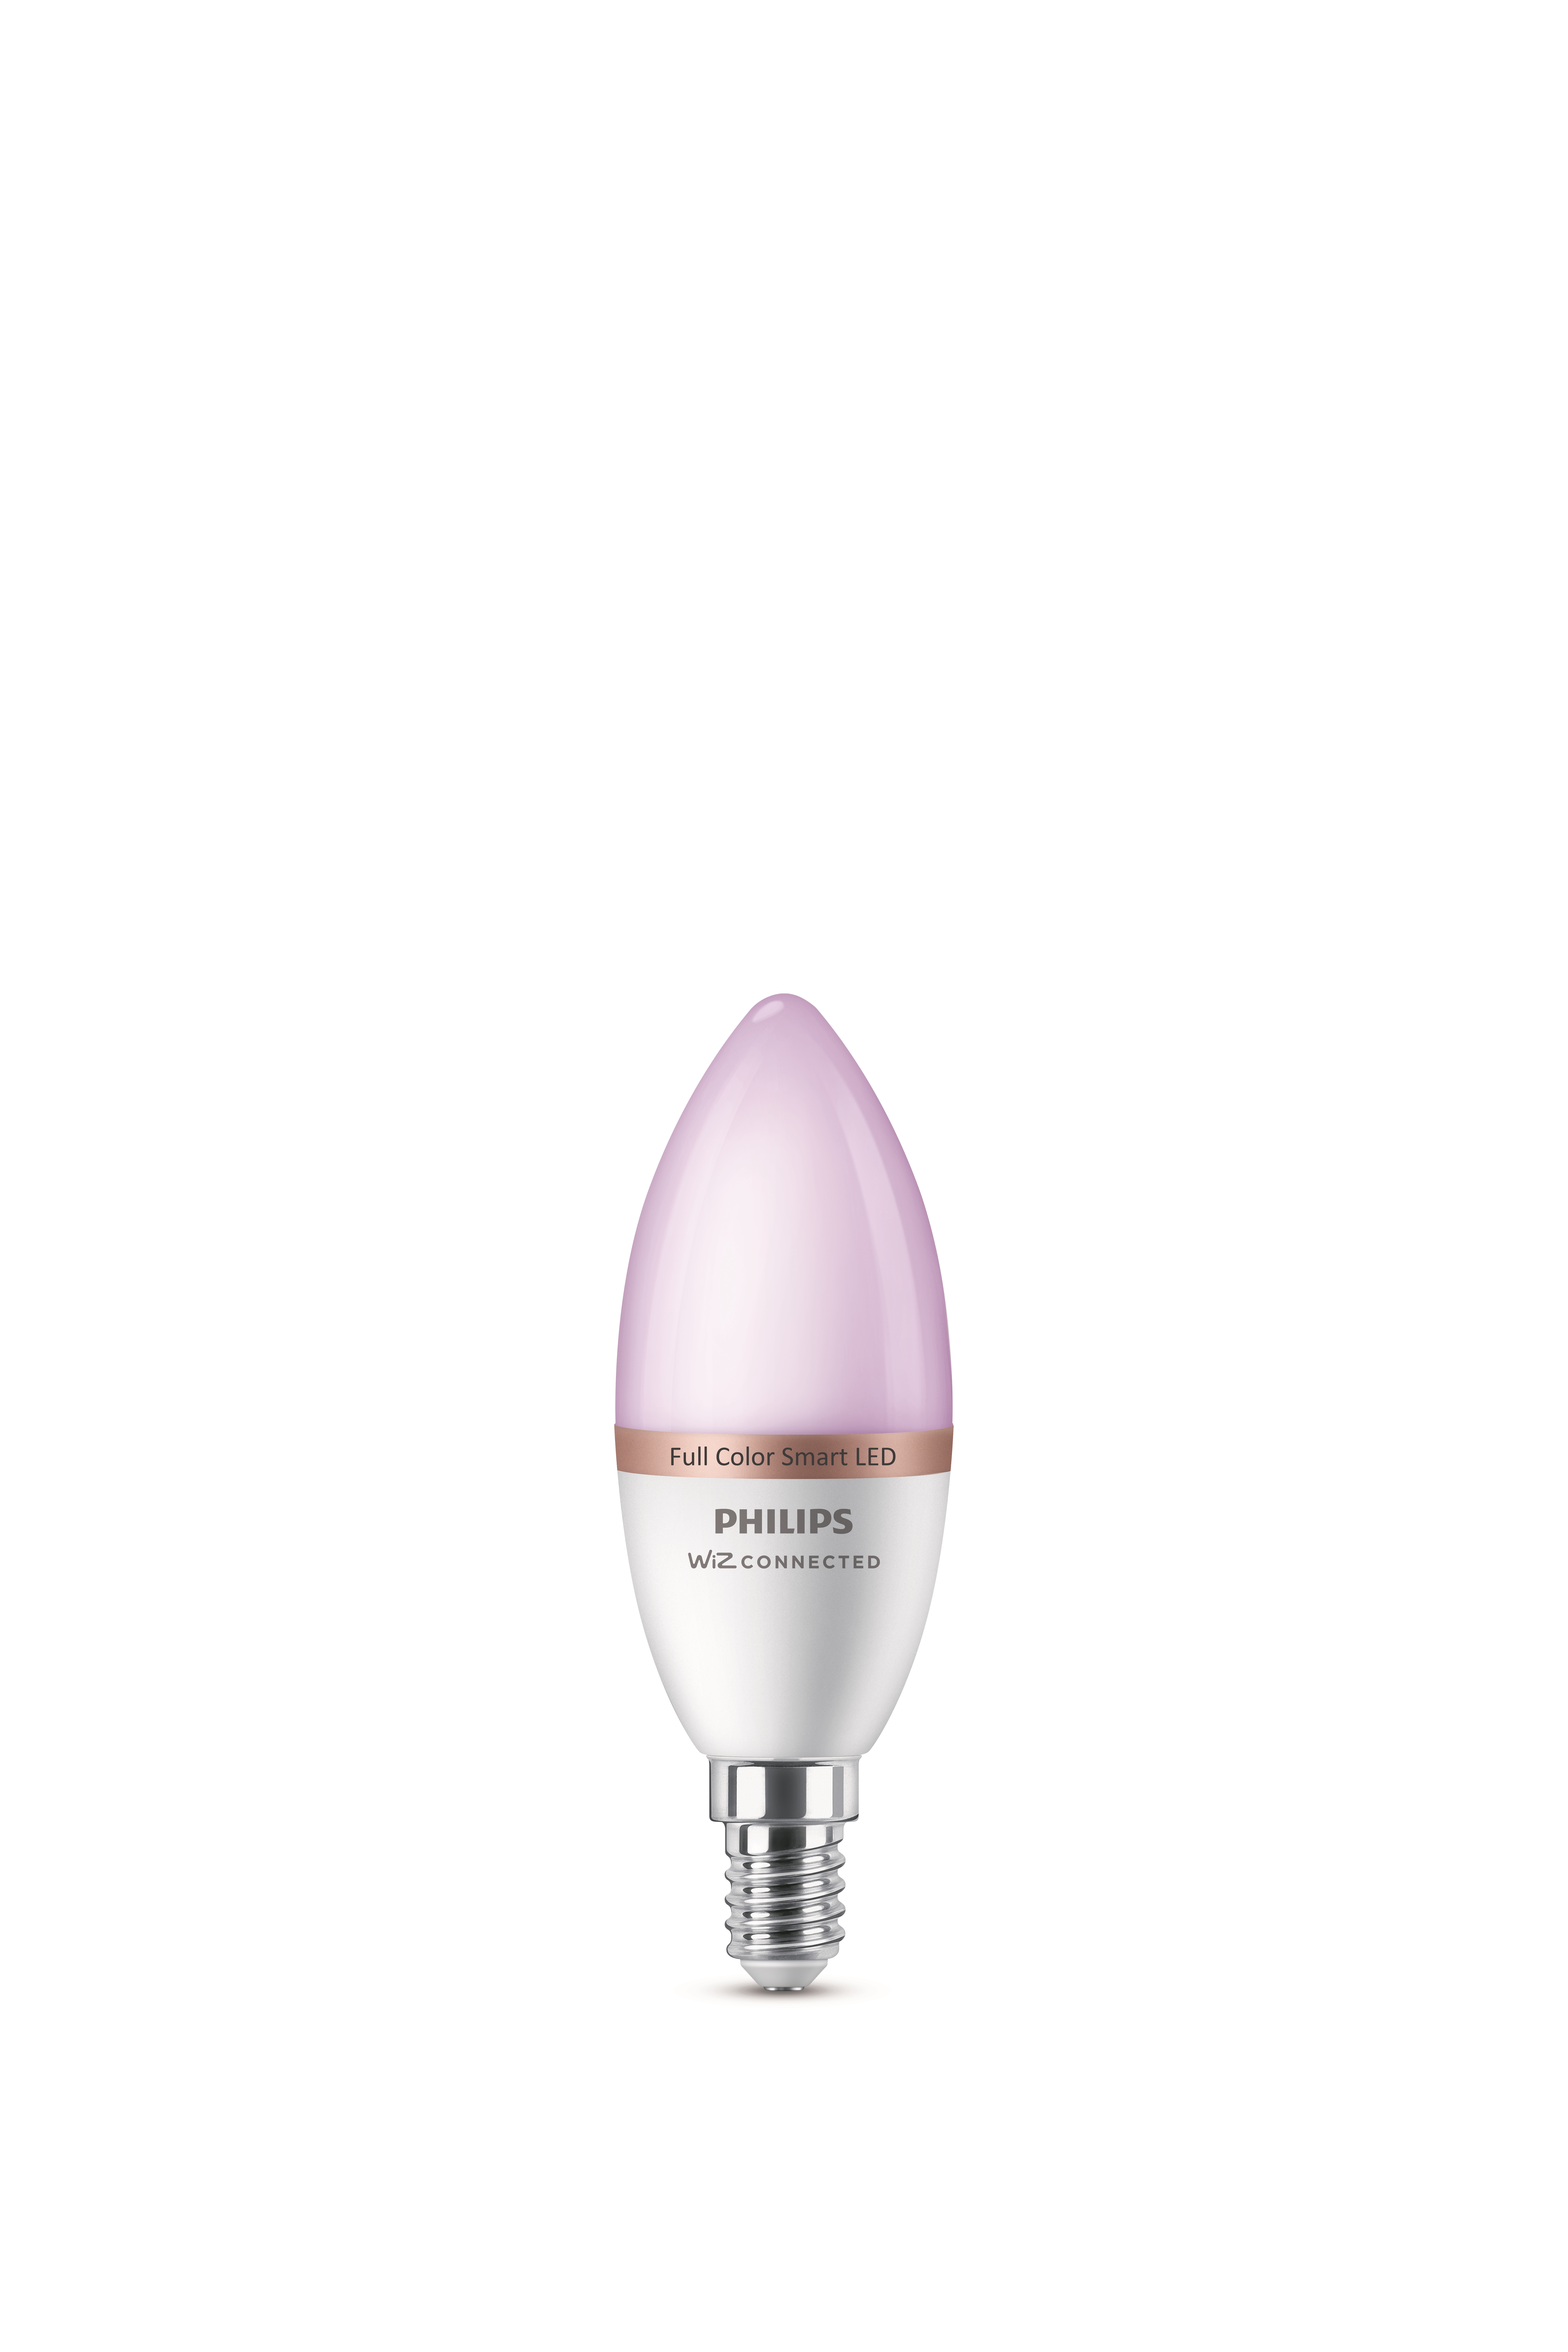 PHILIPS Smart LED E14, WiZ connected, 4,9 W, 470 lm, Full color, dimmbar